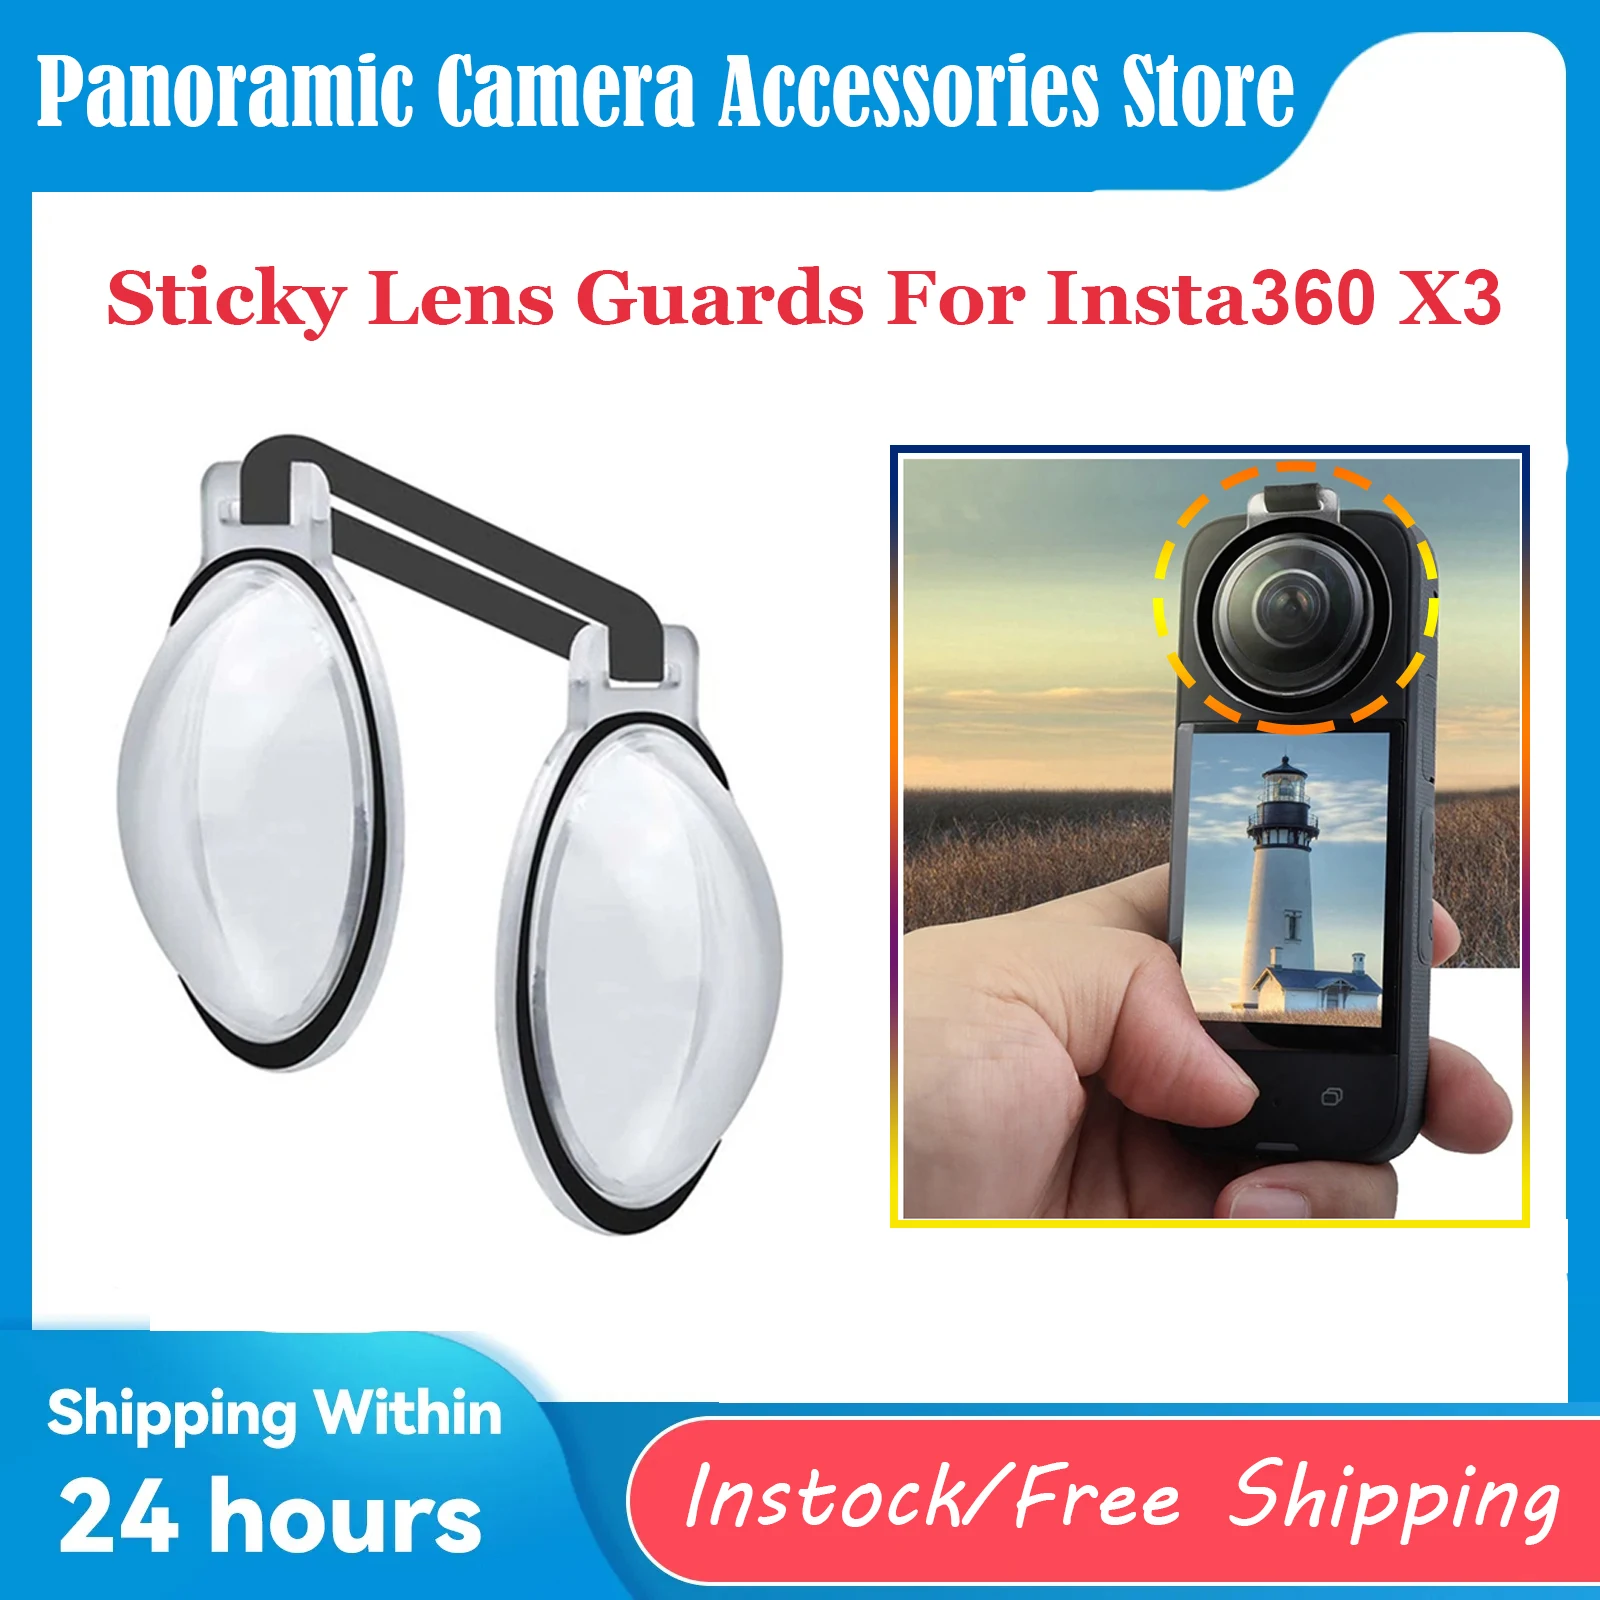 

For Insta360 X3 Sticky Lens Guards Snap Scratch Resistant Dust Protective Cover for Insta360 One X3 Panoramic Camera Accessories